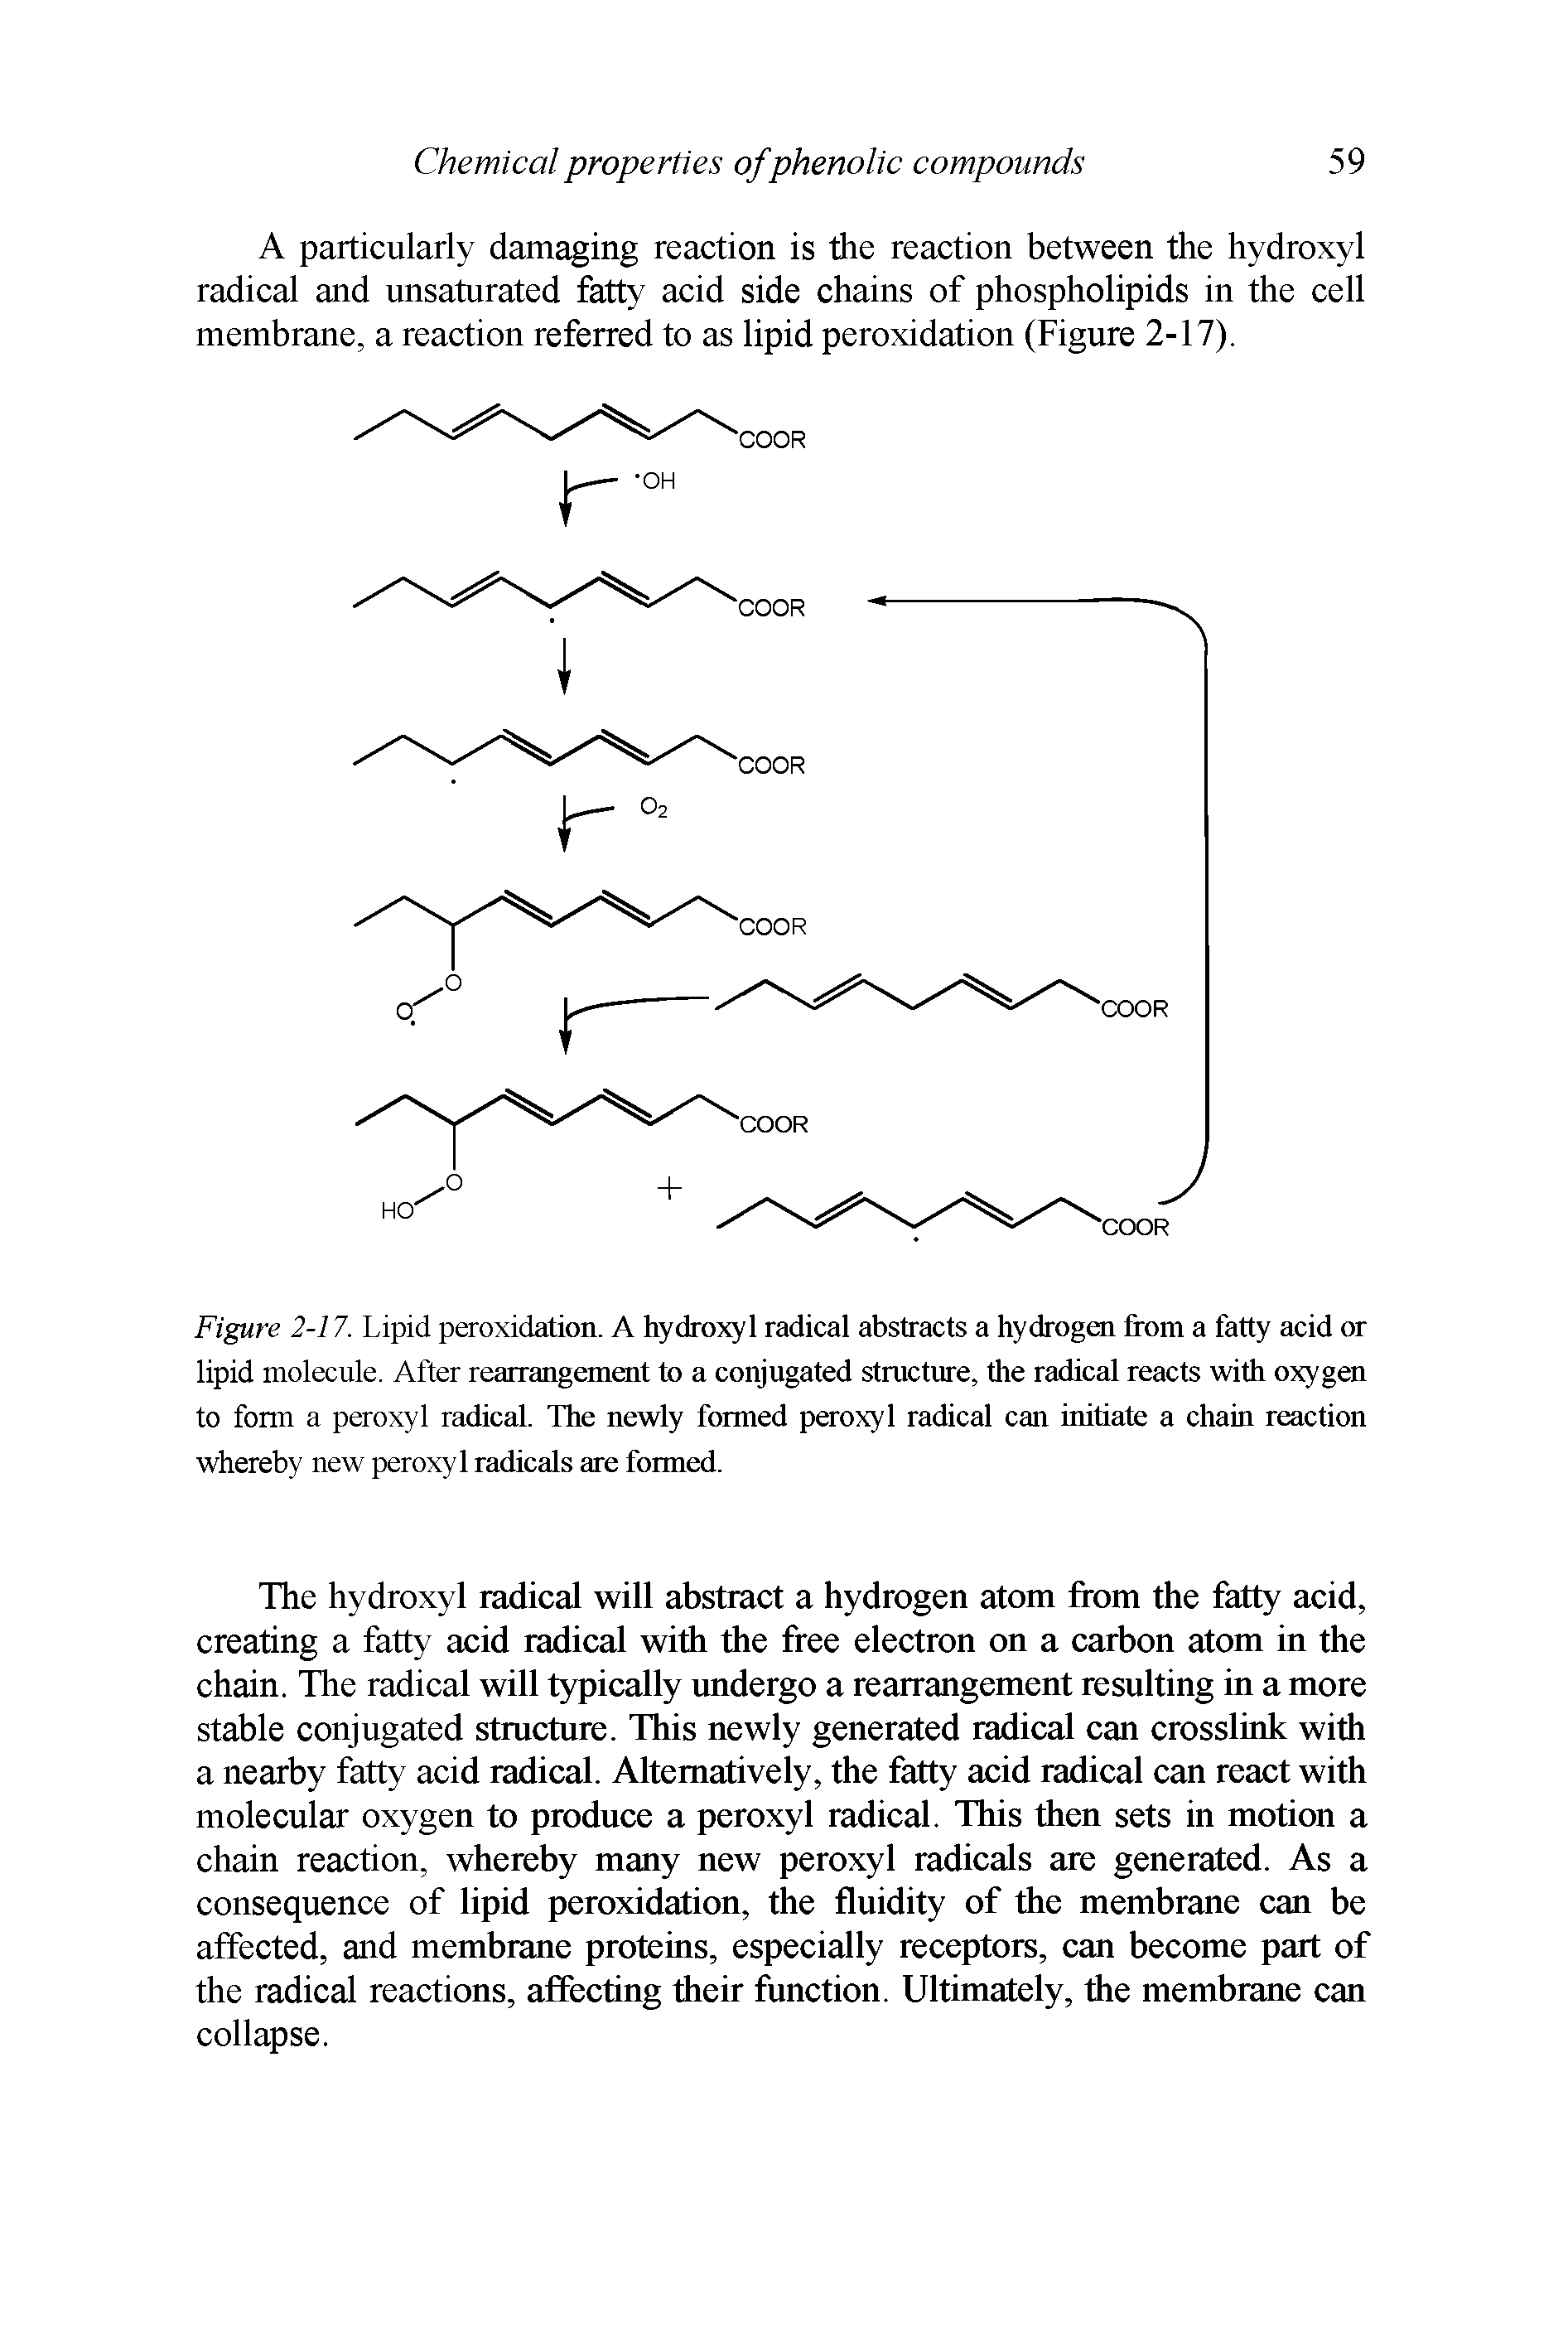 Figure 2-17. Lipid peroxidation. A hydroxyl radical abstracts a hydrogen from a fatty acid or lipid molecule. After rearrangement to a conjugated structure, the radical reacts with oxygen to form a peroxyl radical. The newly formed peroxyl radical can initiate a chain reaction whereby new peroxyl radicals are formed.